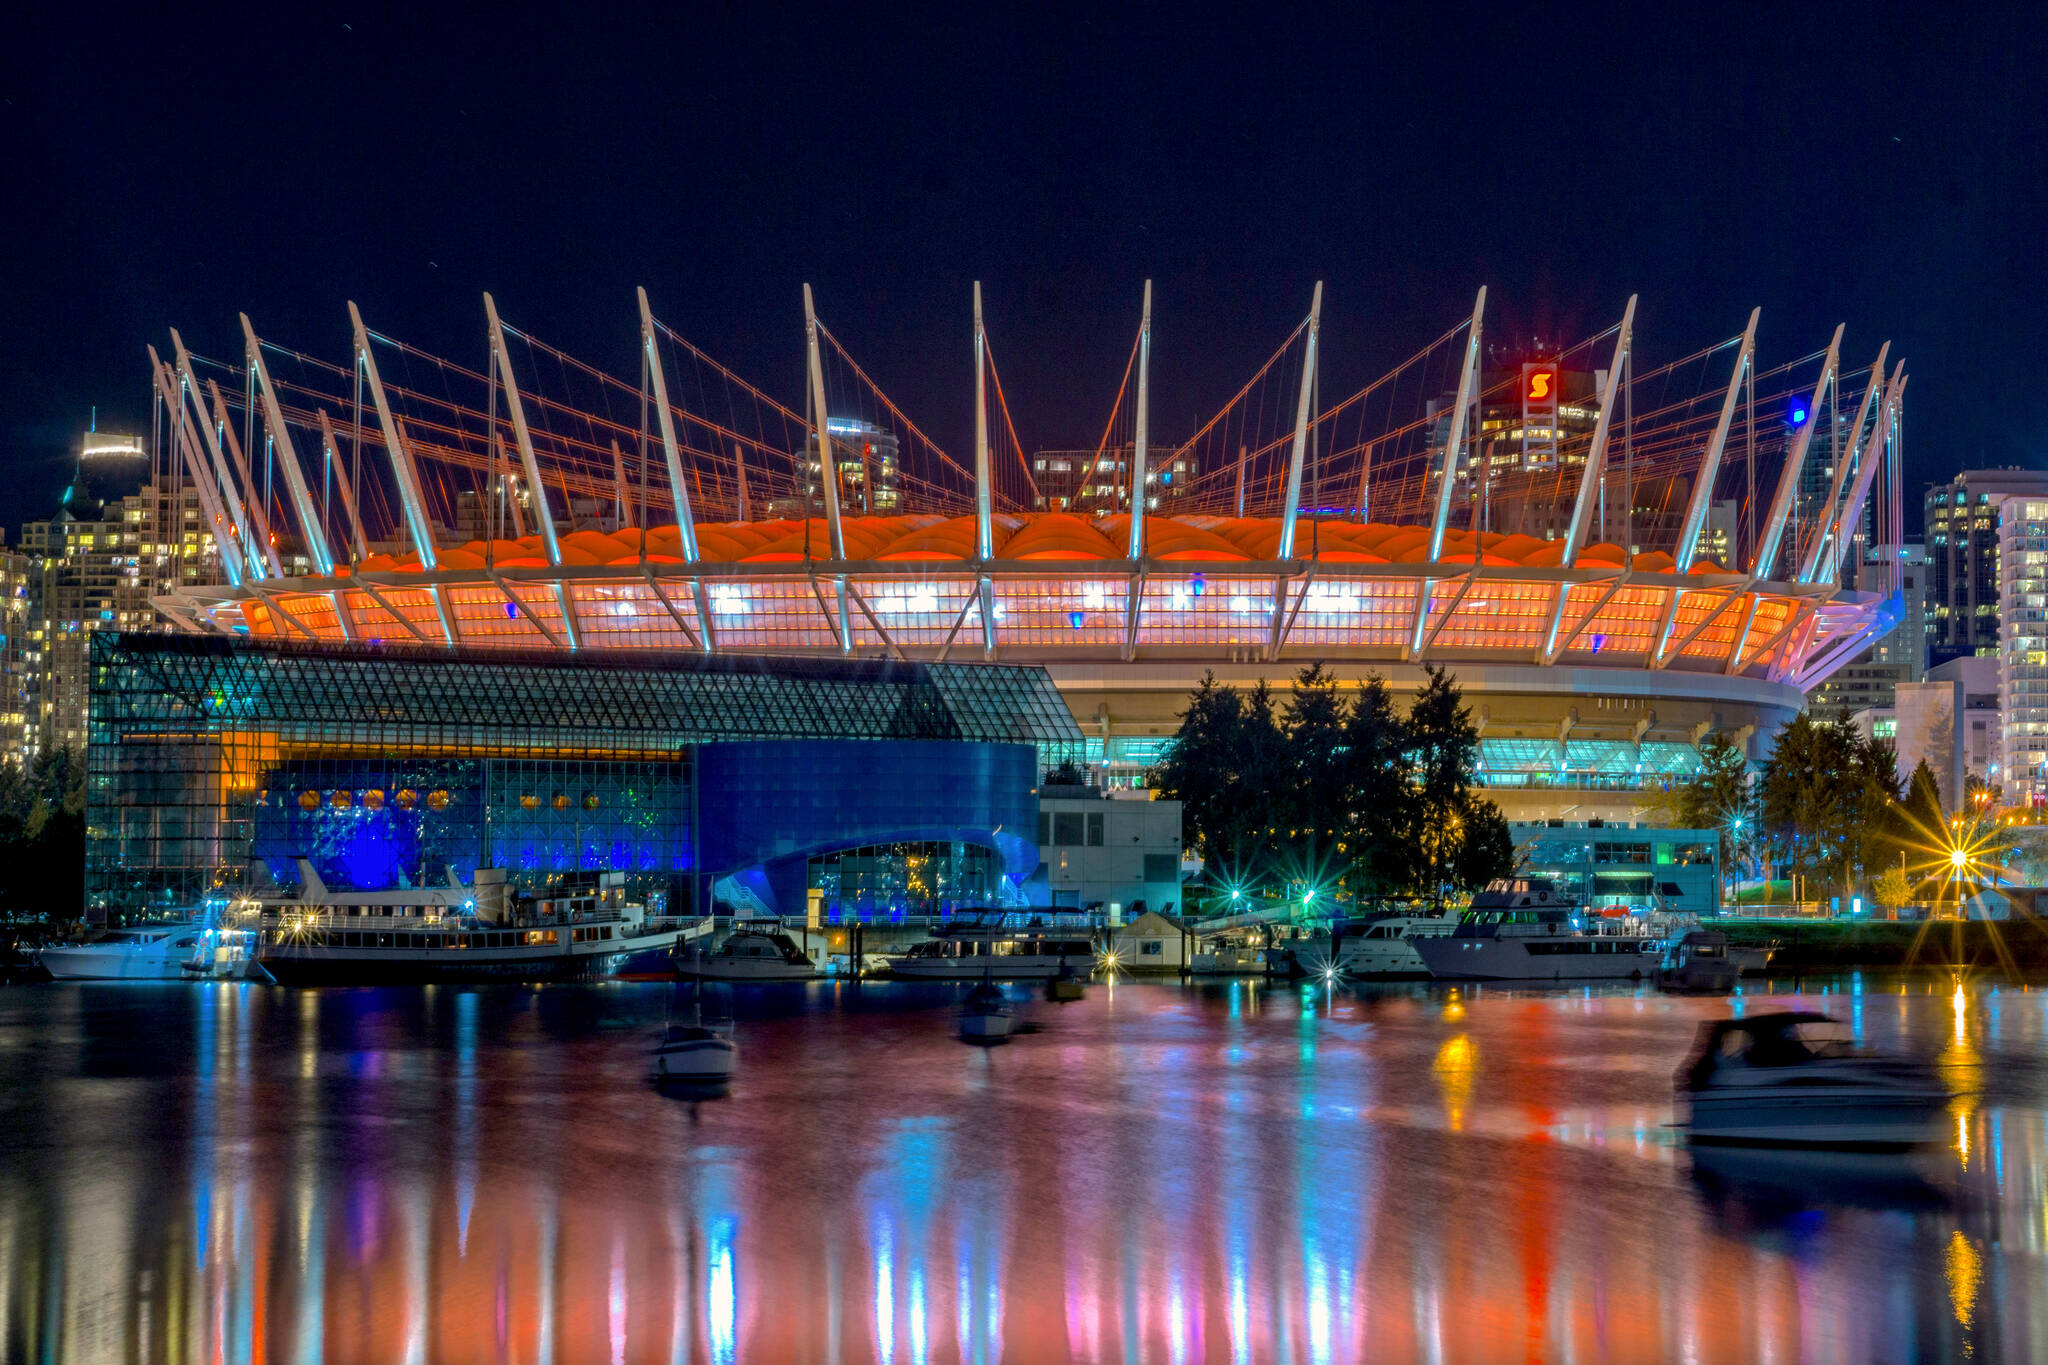 BC Place Stadium will host seven games including two games featuring Canada’s Men’s National Soccer Team when FIFA’s Men’s World Cup, comes to North America. But a report published in 2019 raises questions about the effectiveness of promoting tourism through mega-events like the world’s largest soccer tournament. (Ryan Adams/Wikimedia Commons)